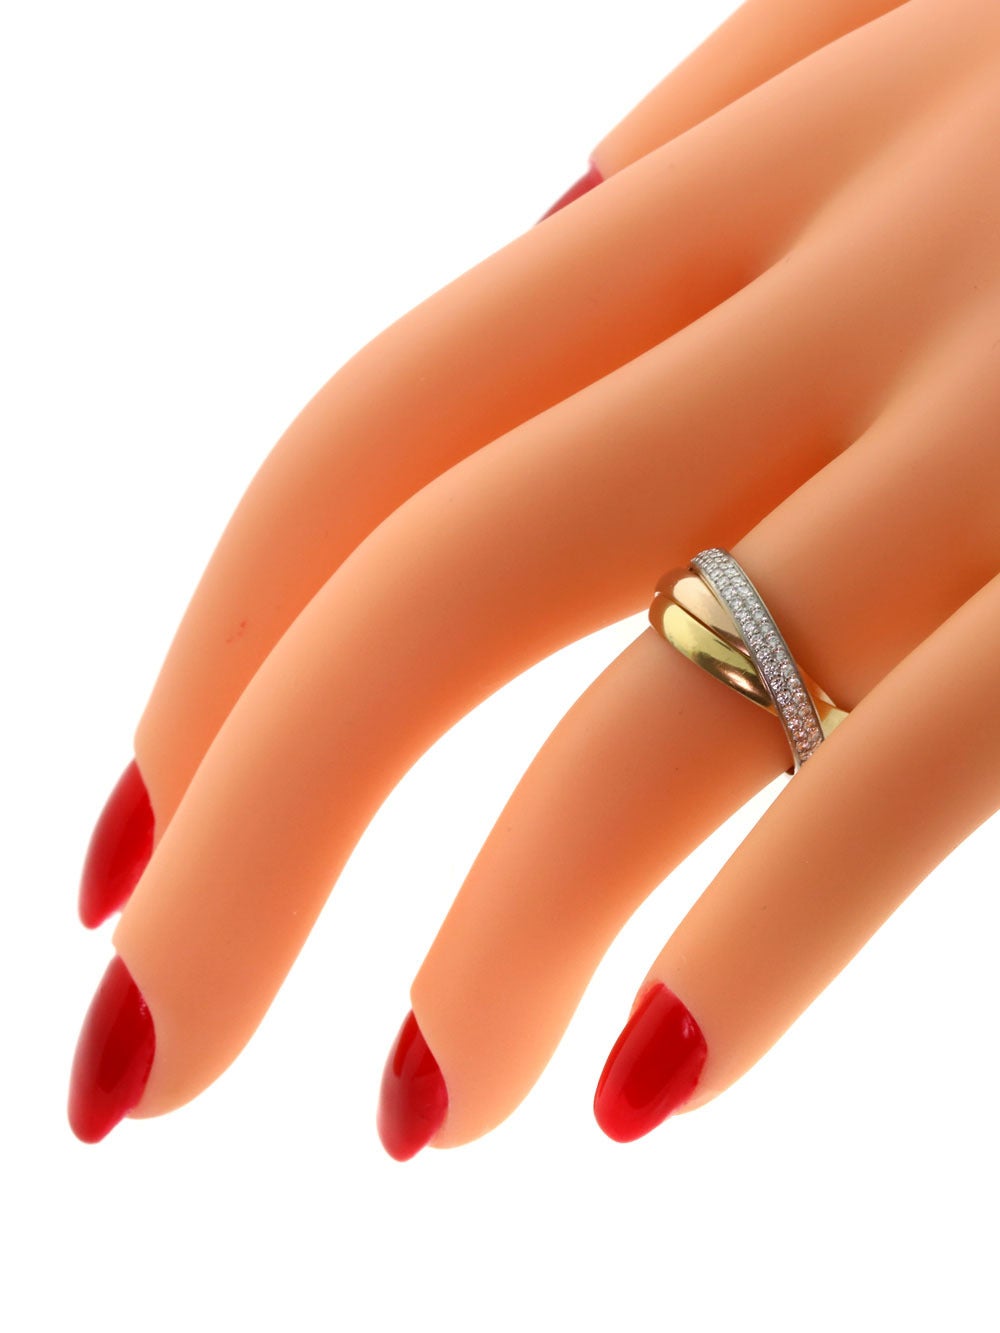 This Cartier Trinity diamond ring is sure to glamorize the hand of any woman who chooses to wear this truly special and memorable creation. The three rings of white, yellow, and rose gold interlock and connect to create an emblematic effect that the